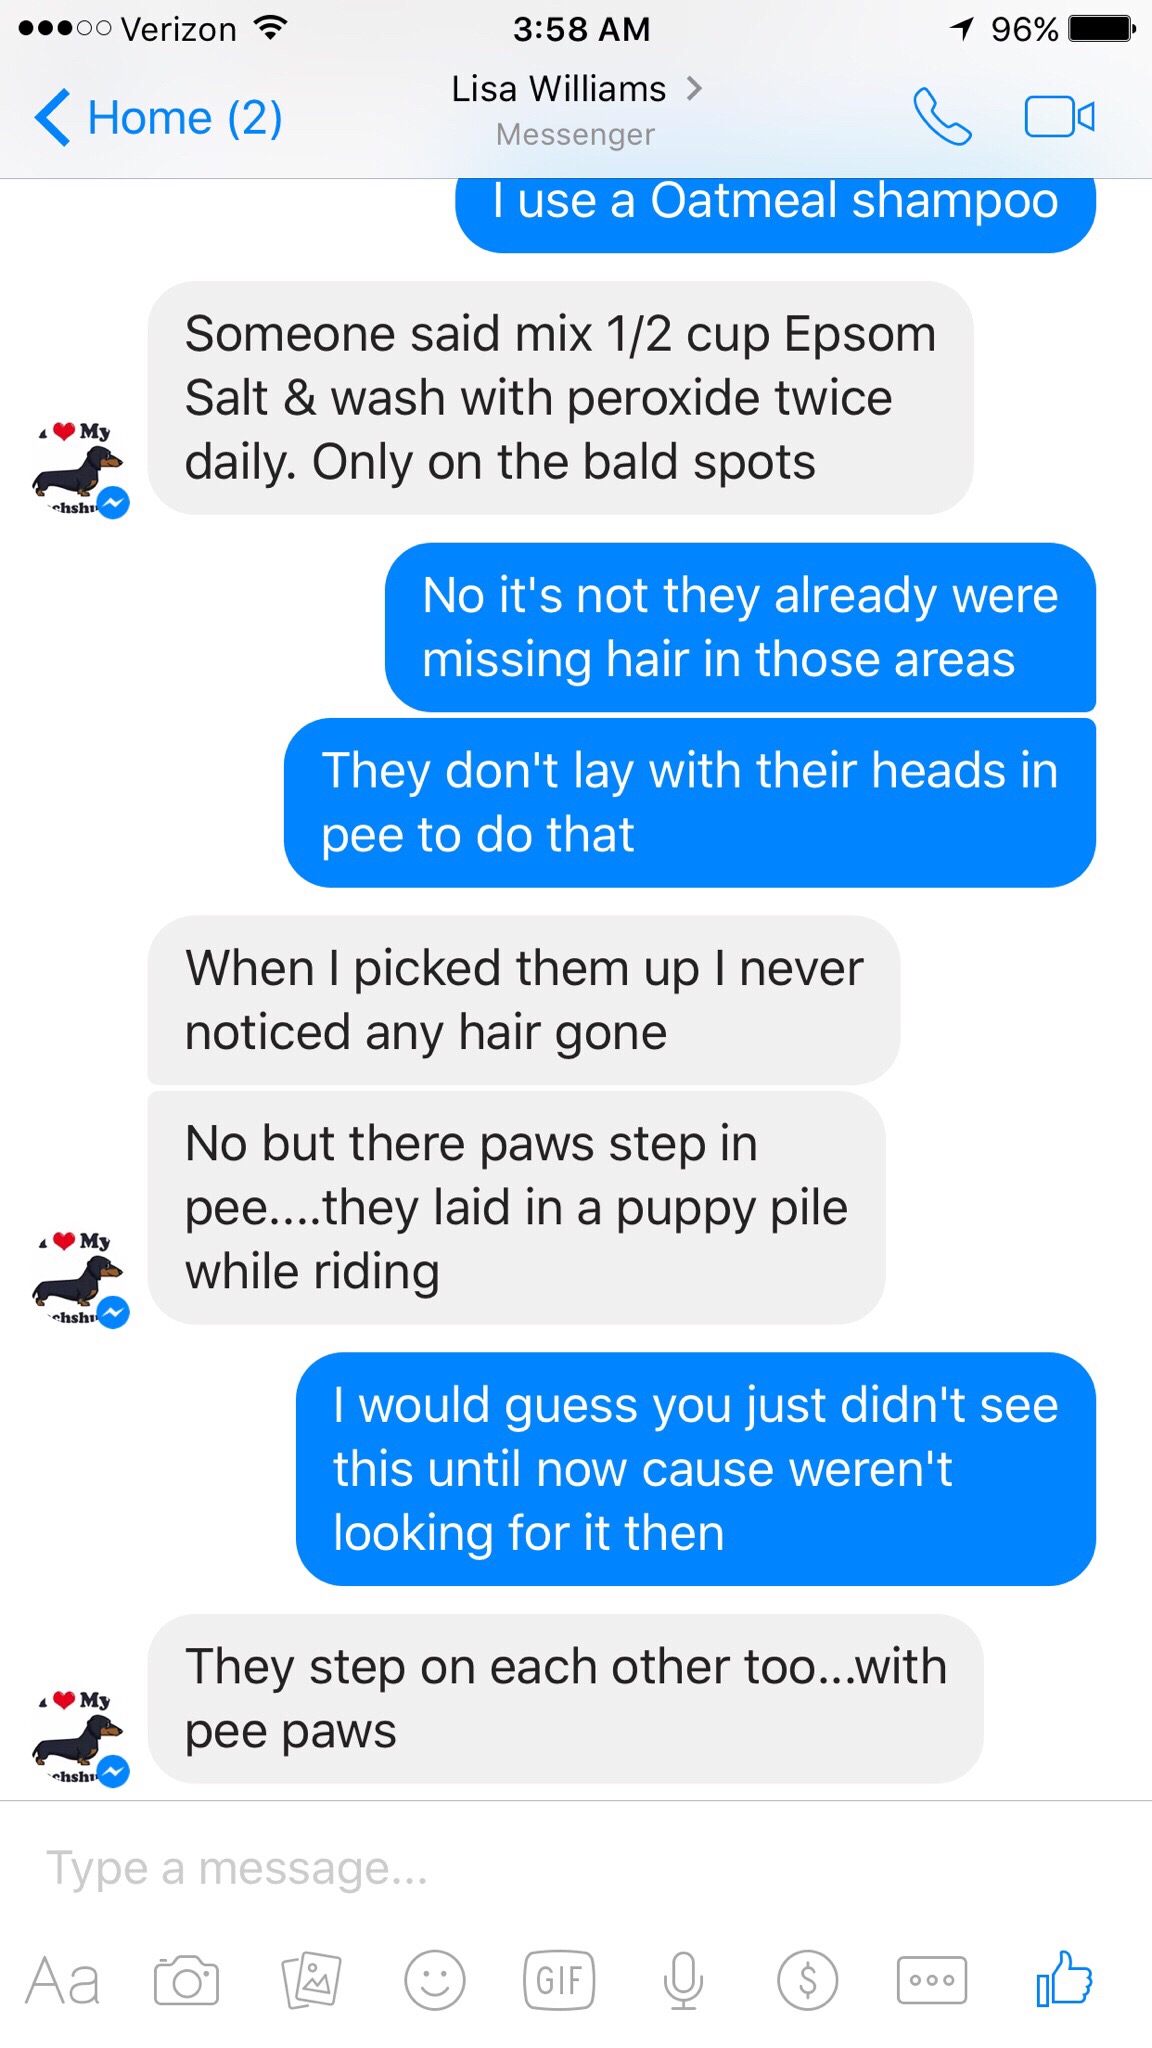 Continued screenshot from Lisa regarding the poor conditions of puppies 